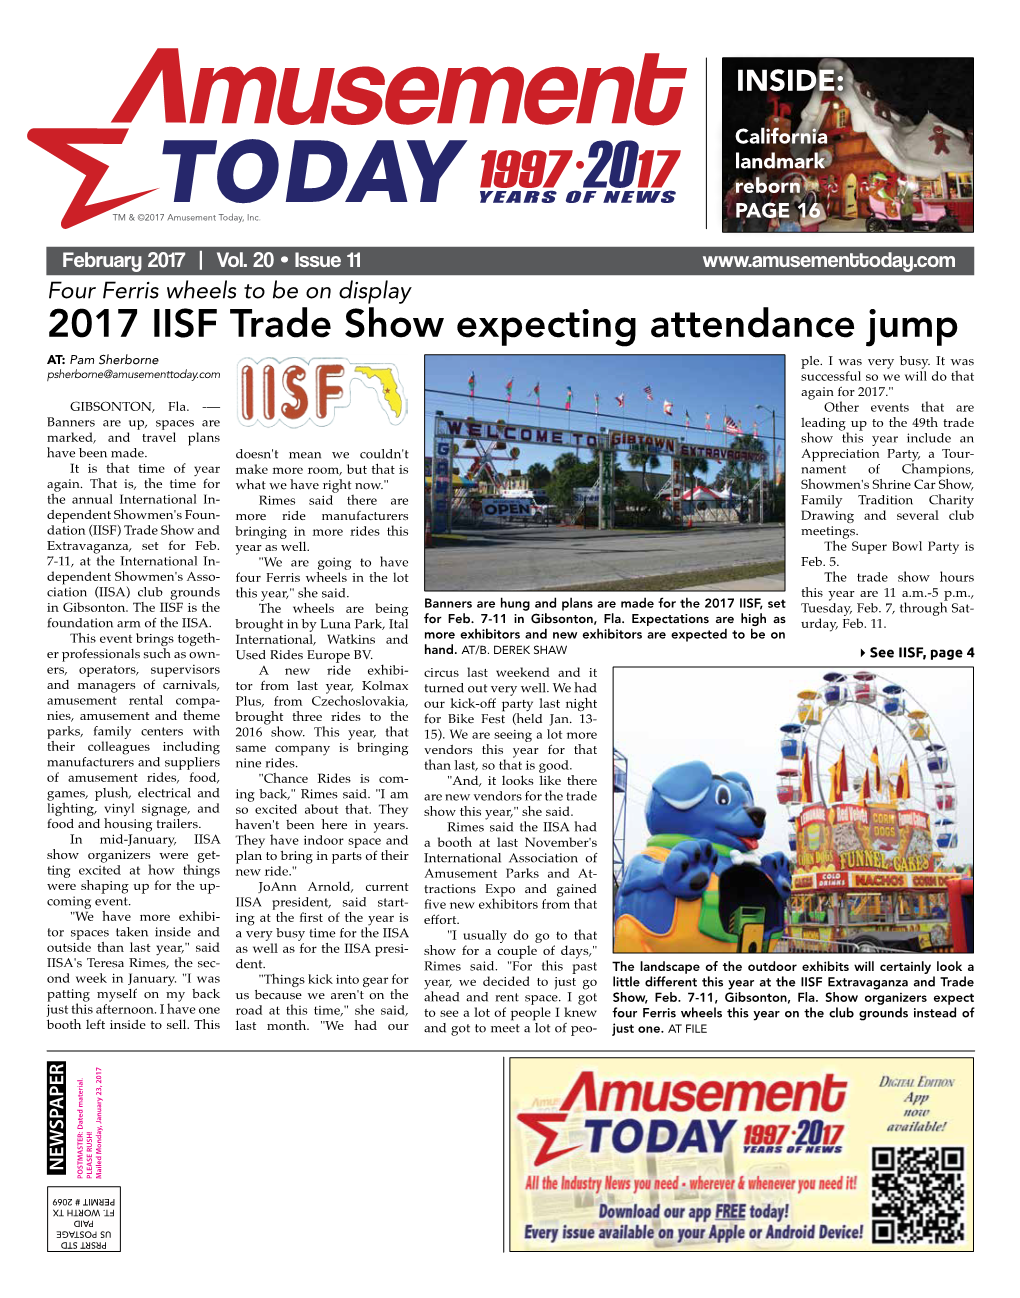 2017 IISF Trade Show Expecting Attendance Jump AT: Pam Sherborne Ple